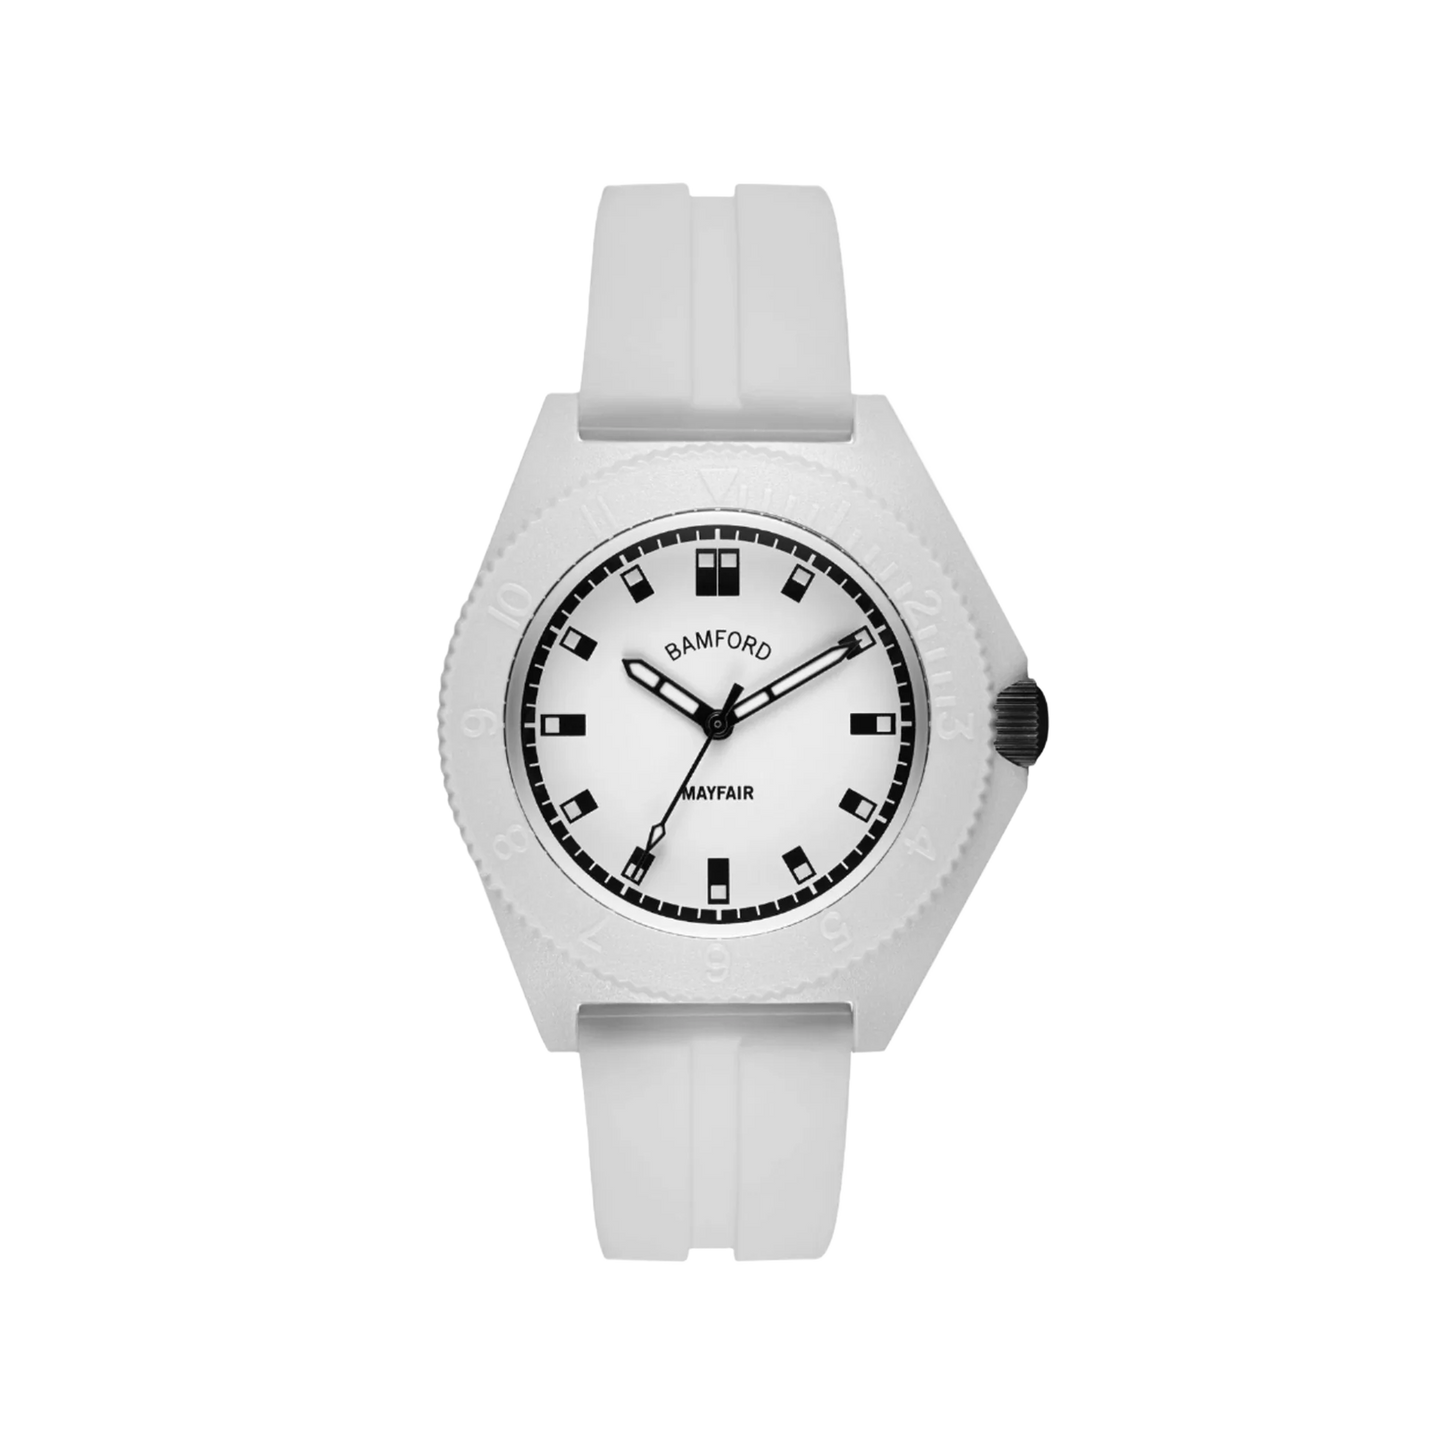 Bamford Mayfair Sport - White With Black Accents